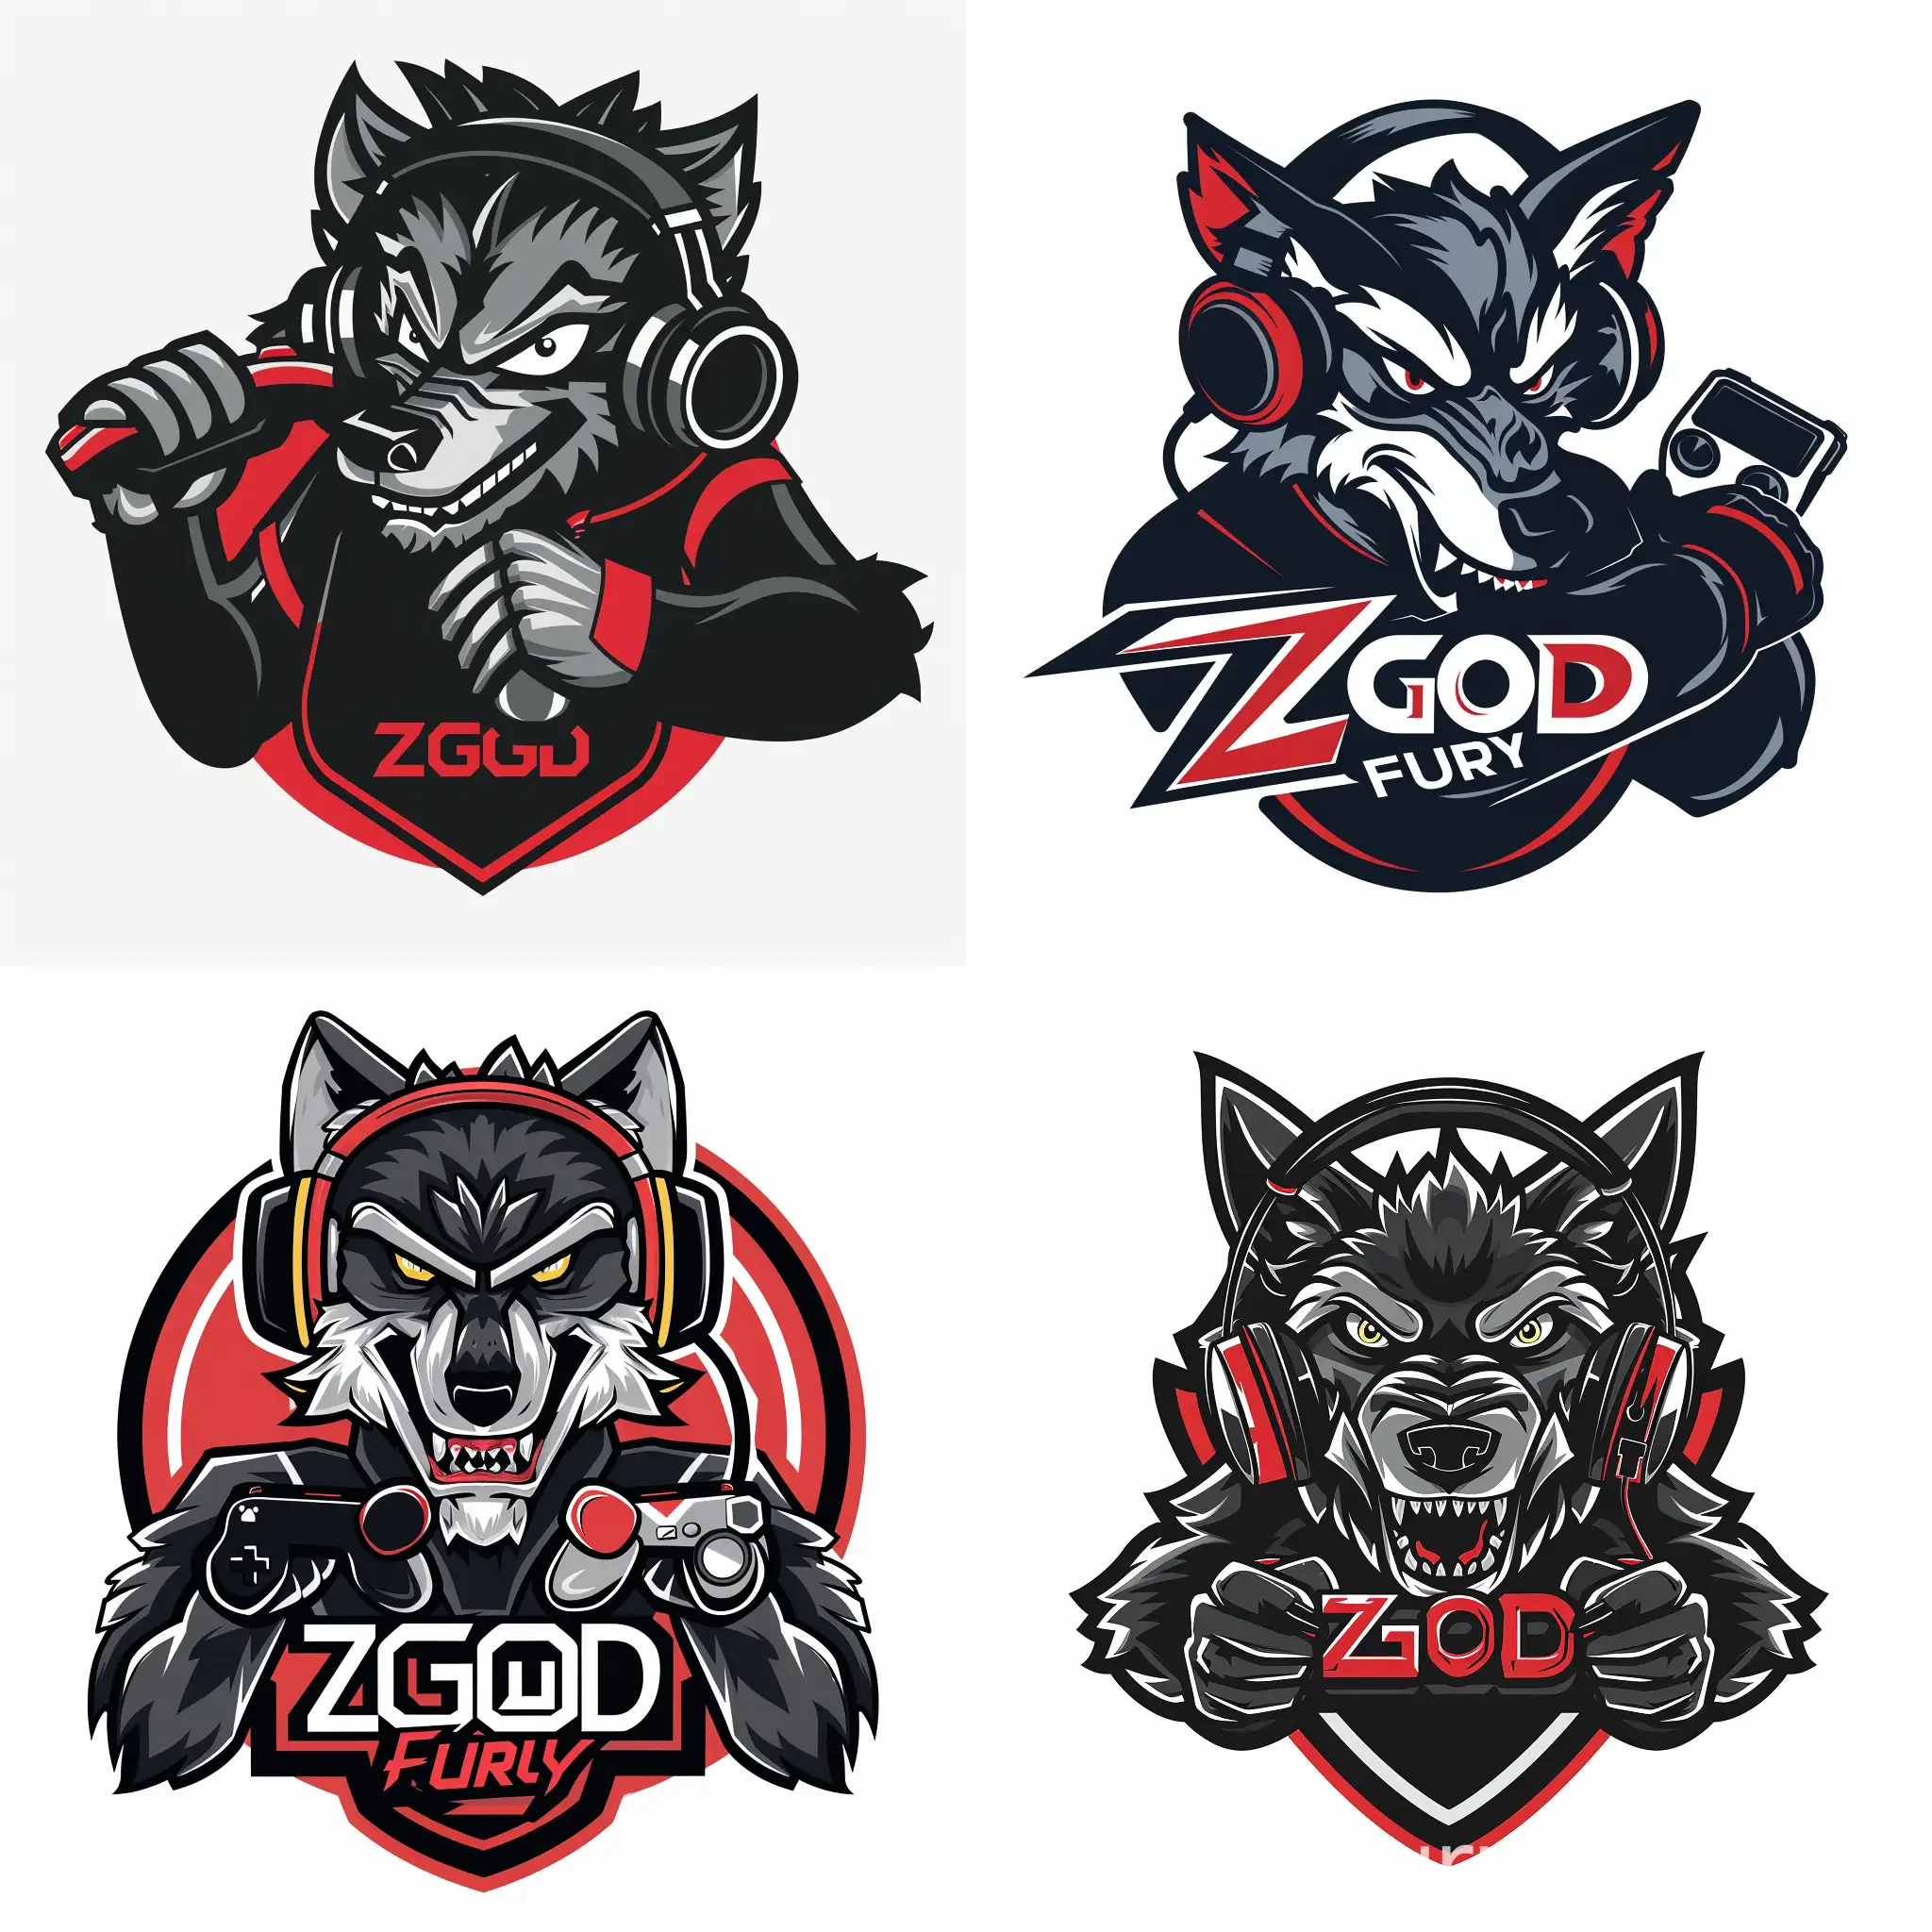 Create a flat vector, illustrative-style mascot logo design for 'ZGOD fury', where a fierce-looking wolf wearing gaming headphones and holding a gaming controller is depicted. Use bold and intense colors such as black, red, and silver to represent the event's competitive spirit against a white background. The logo should capture the tenacity and determination of the participants.